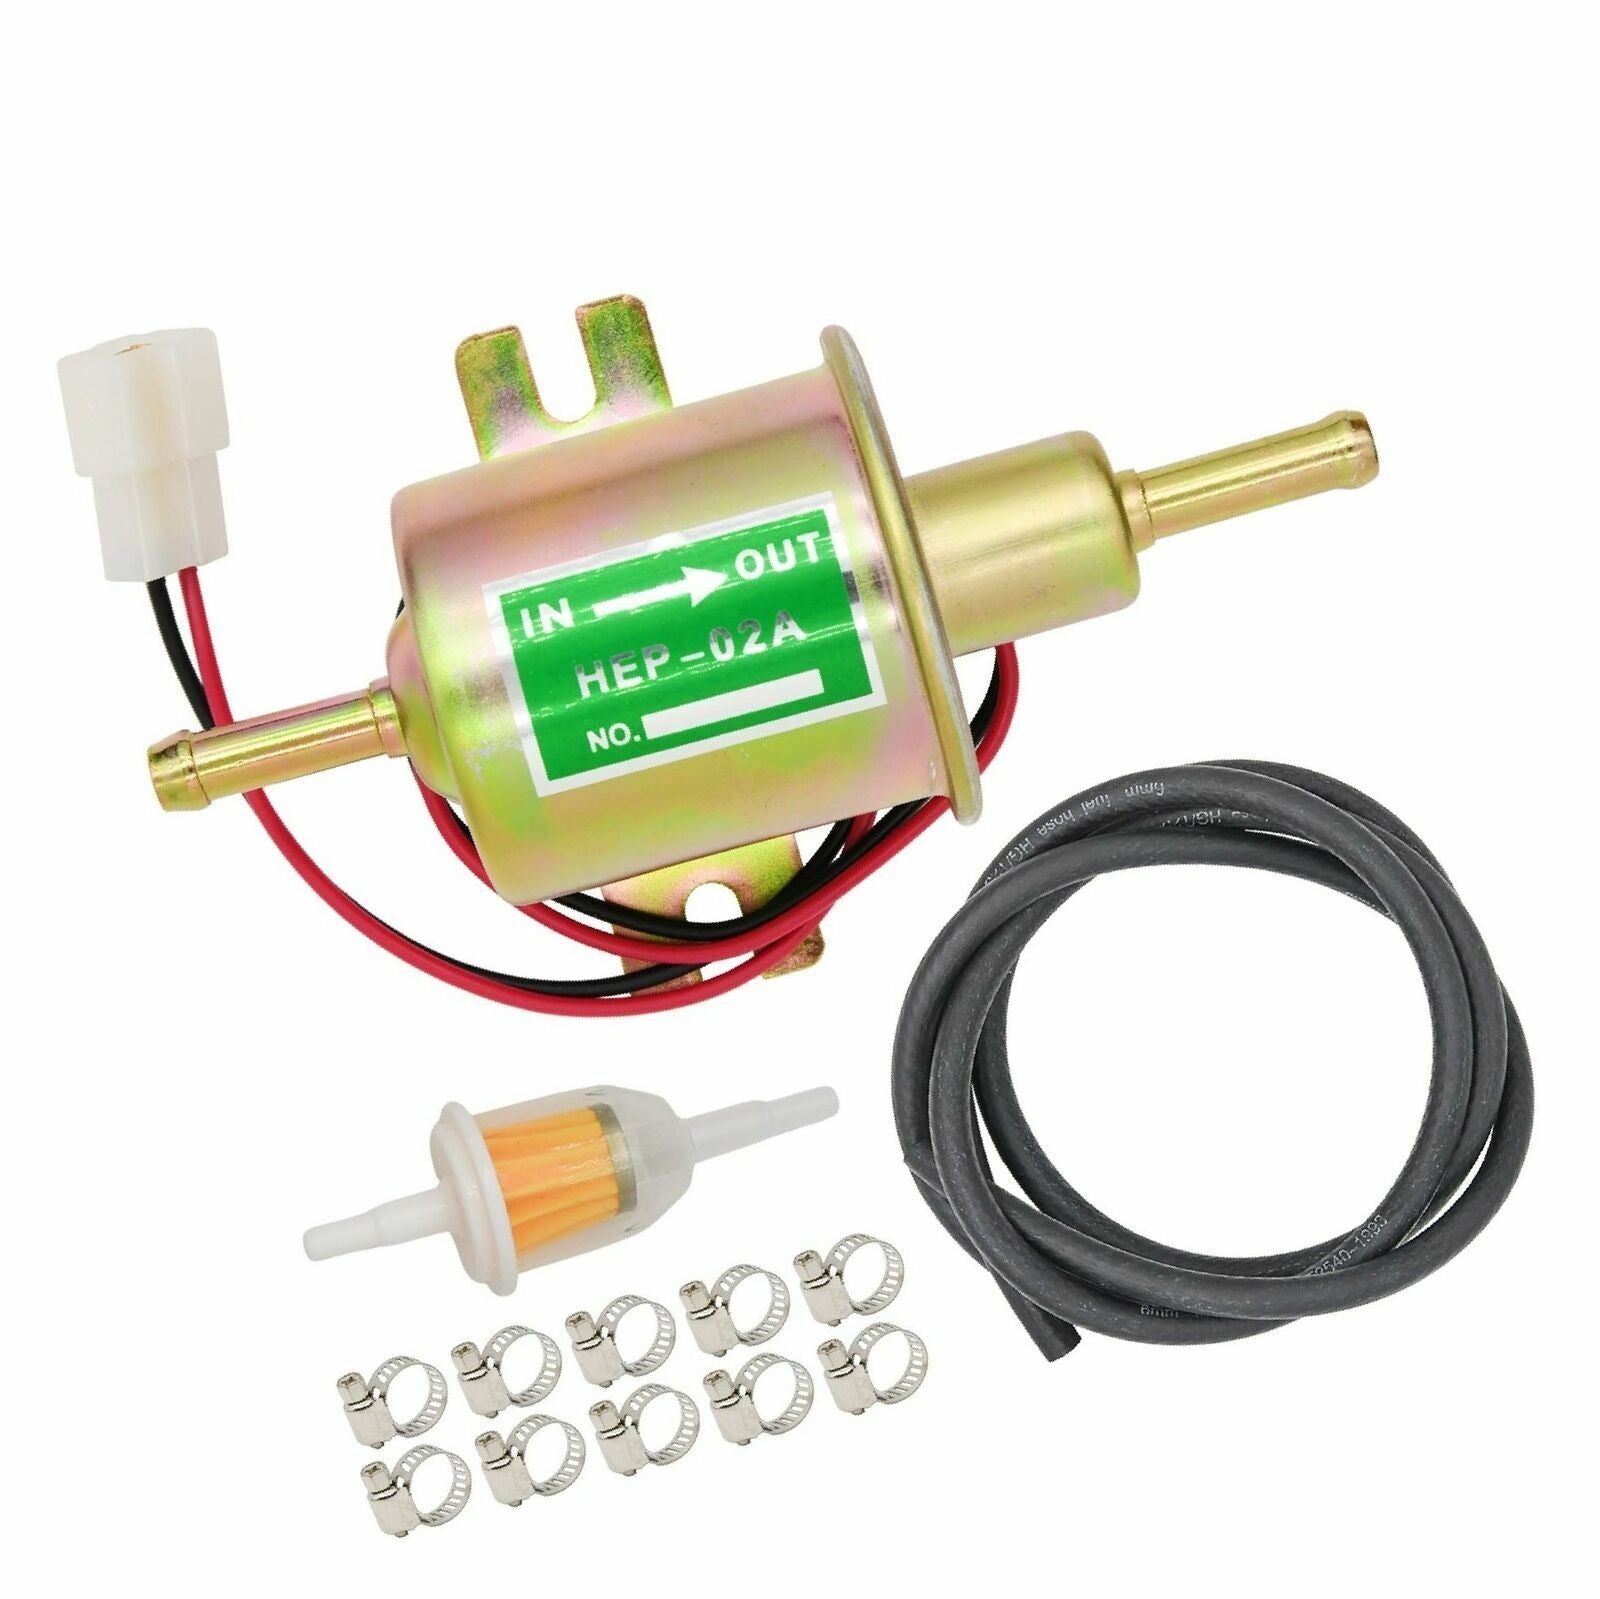 NEW HEP 02A HEP02A UNIVERSAL 12V ELECTRIC FUEL PUMP INLINE DIESEL